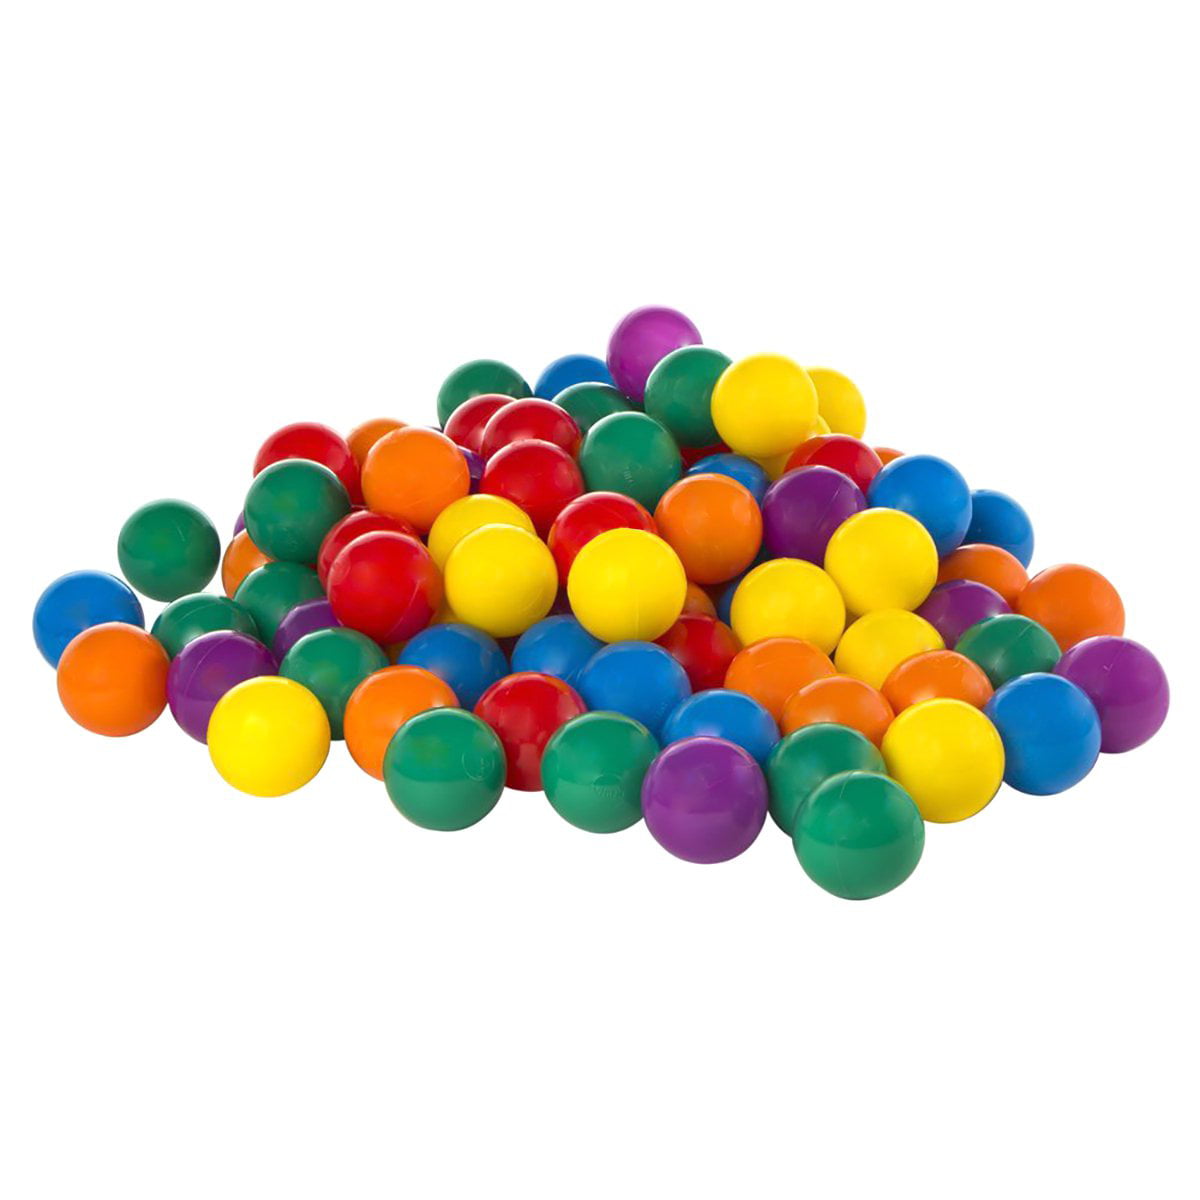 100-Pack Intex Large Plastic Multi-Colored Fun Ballz For Ball Pits49600EP 